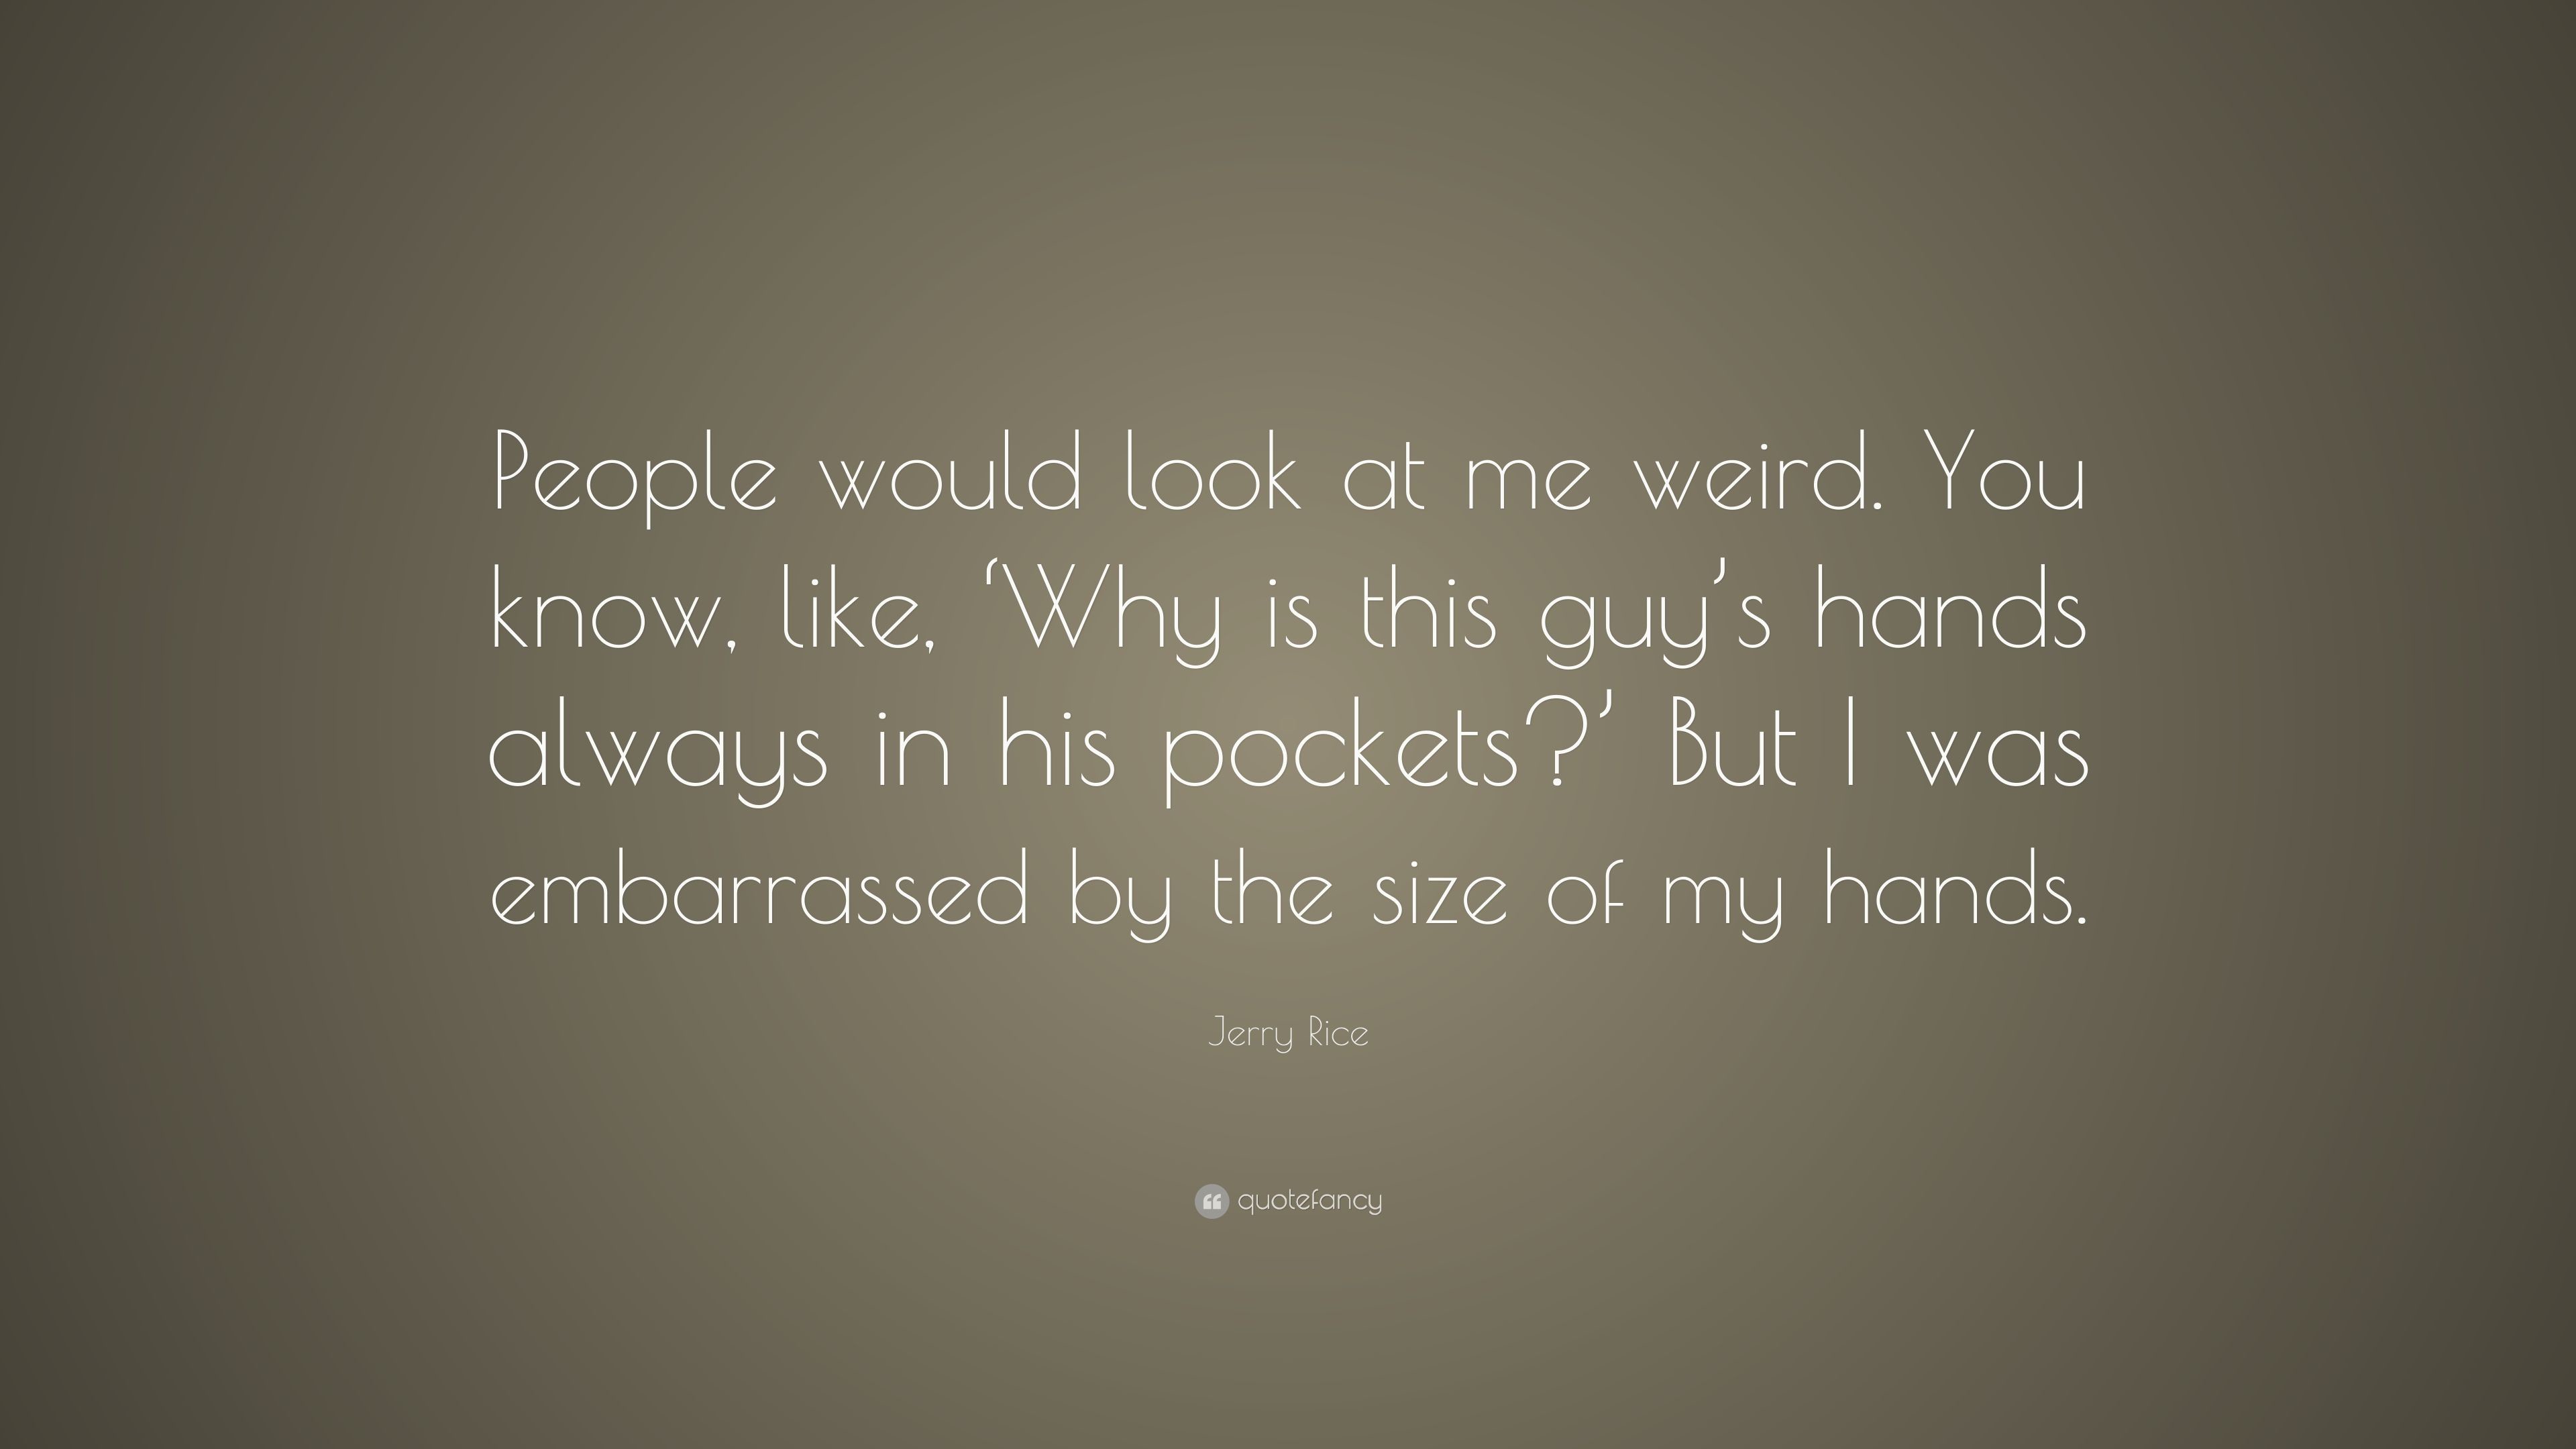 3840x2160 Jerry Rice Quote: "People would look at me weird. 